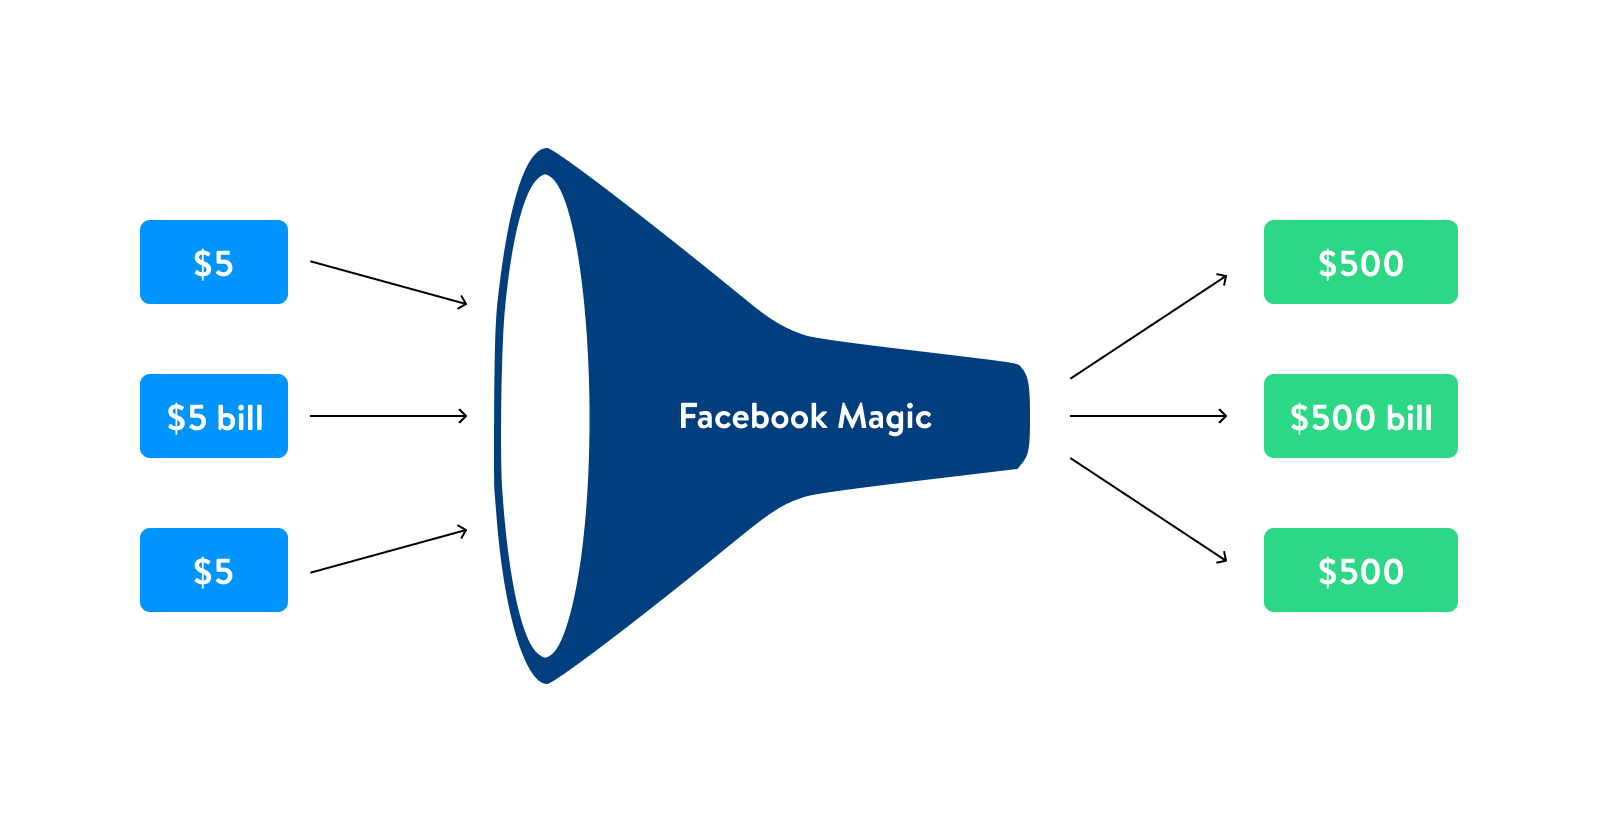 Facebook isn't magic: You can't just spend $5 and expect a $500 return. Russ Ruffino's Clients on Demand promises lead gen via a Facebook ad funnel. Find out who this works for (and who should go with another strategy instead).